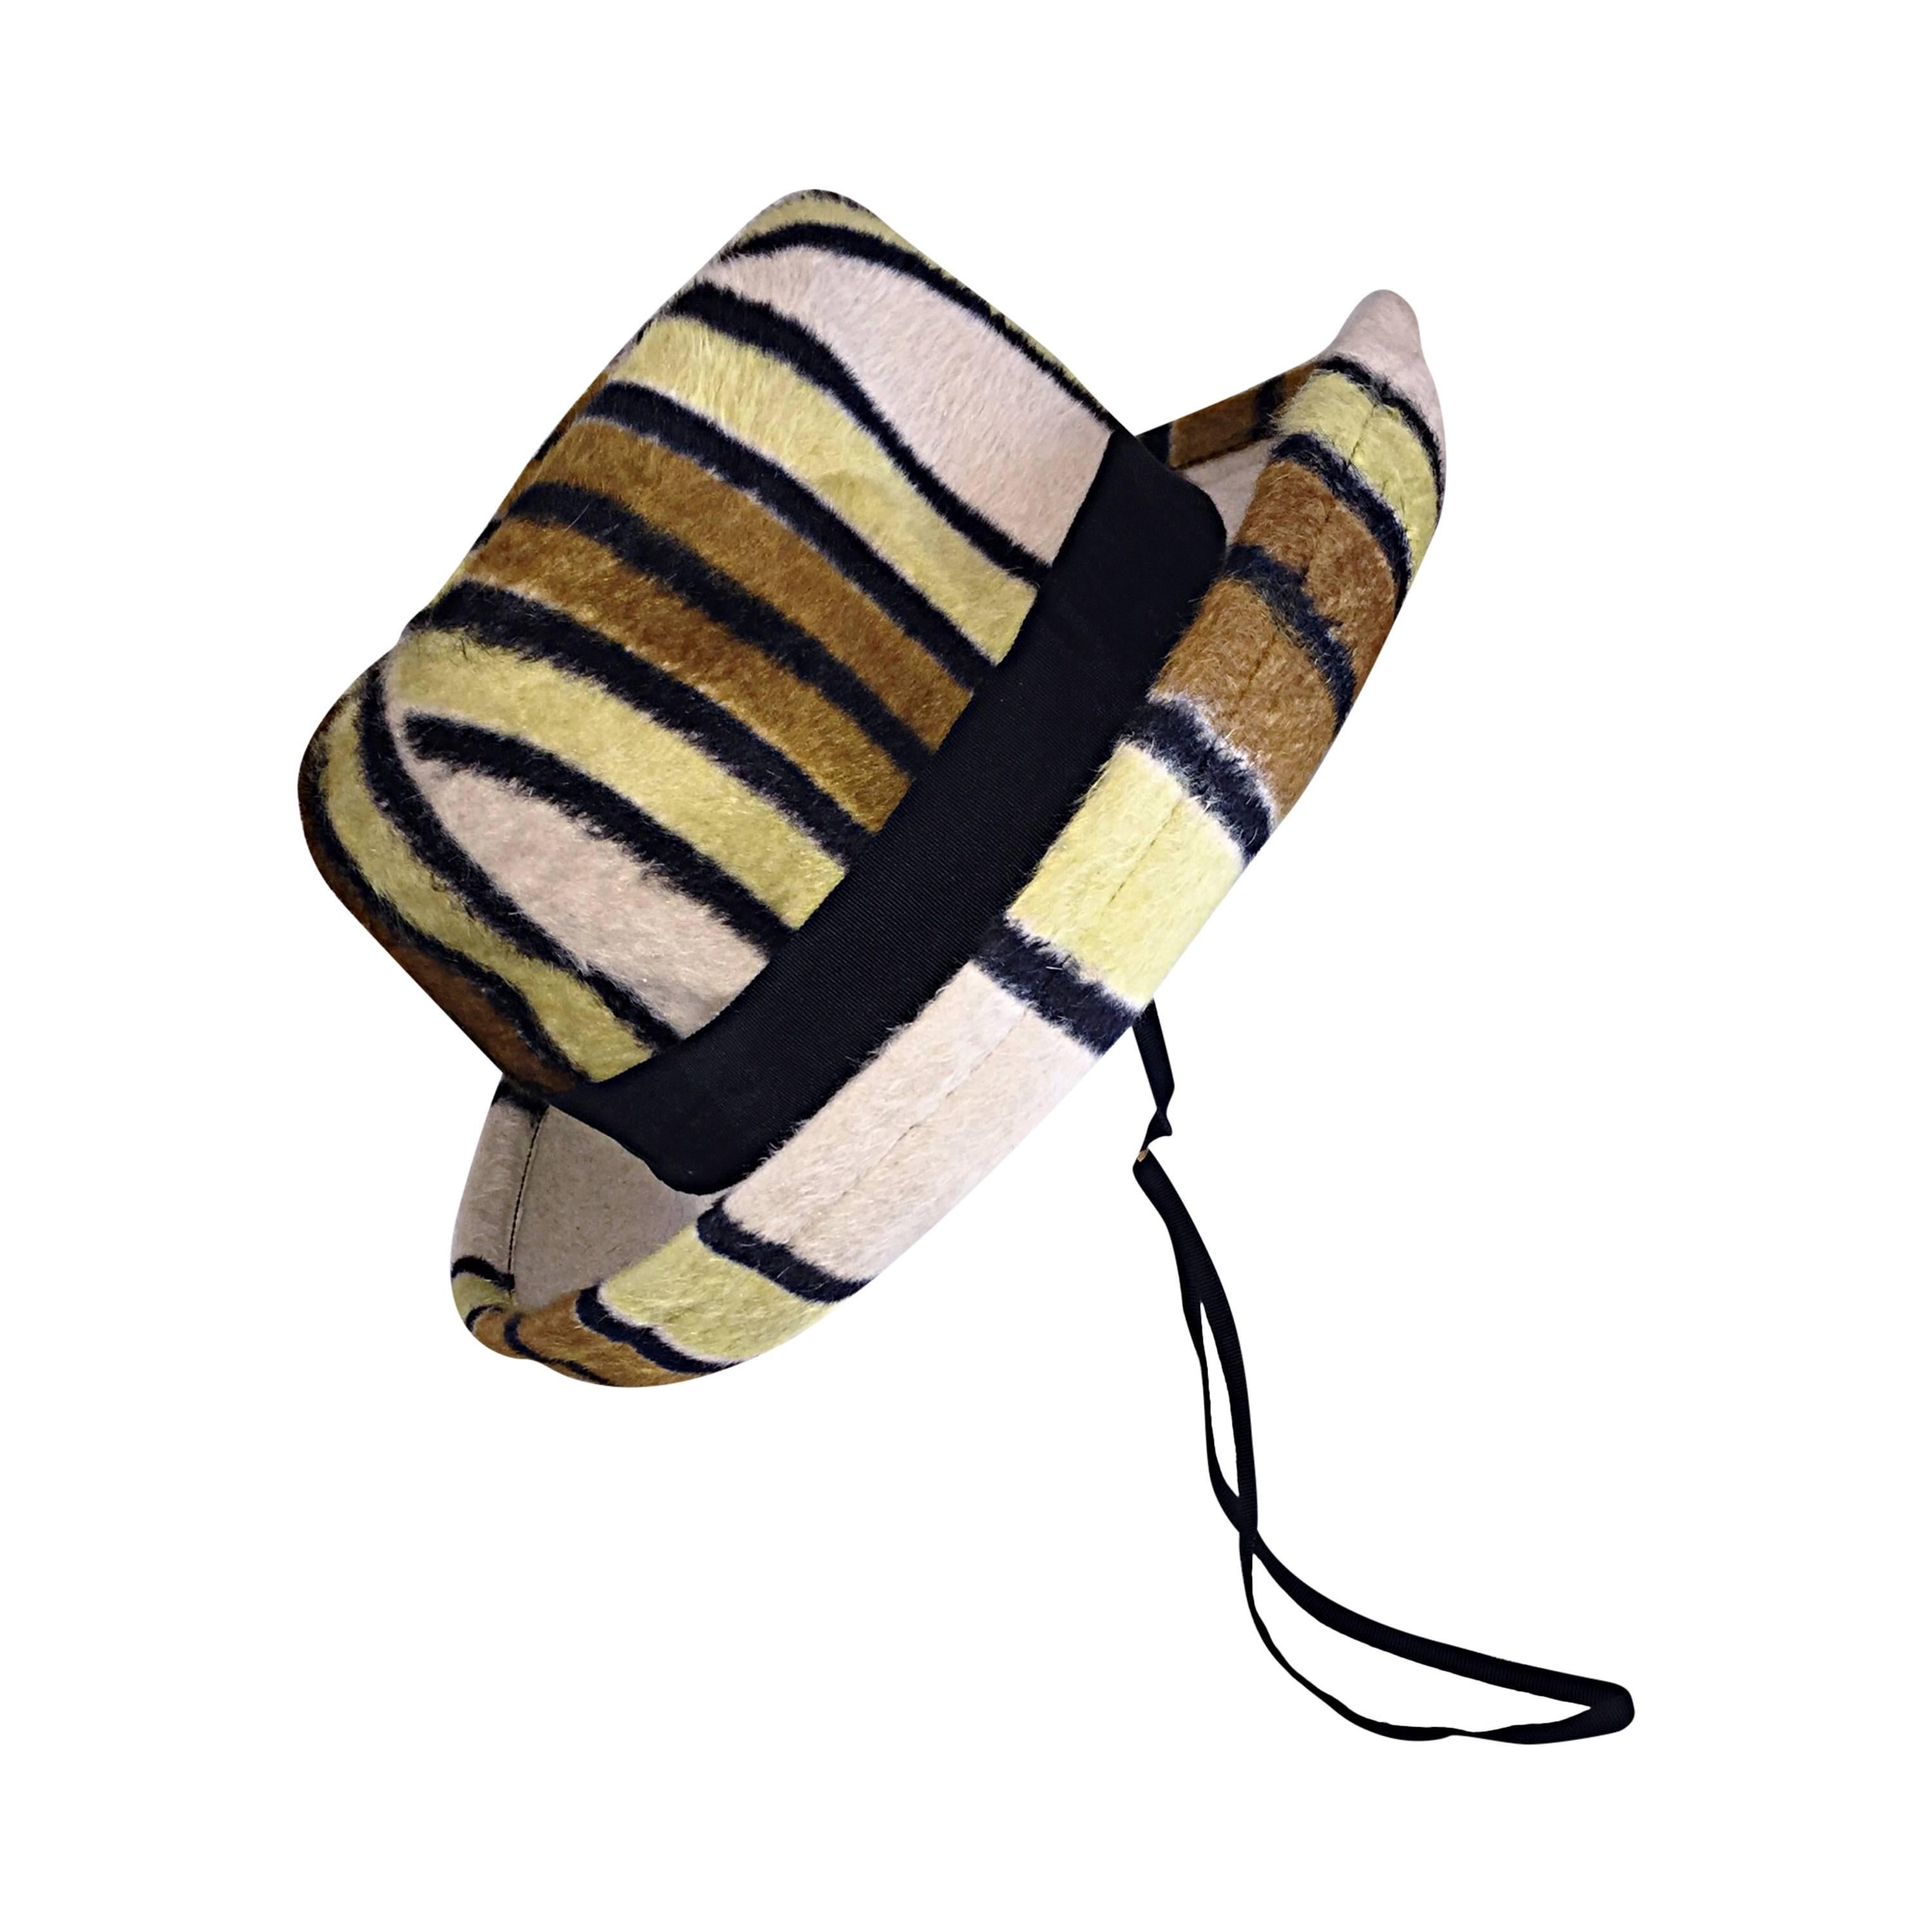 Rare vintage Yves Saint Laurent hat! Features stripes of brown, yellow, black and ivory throughout. Has an adjustable chin strap. Looks great on, and can be worn a variety of ways. In great condition. Would fit anywhere from Small-Large, given the